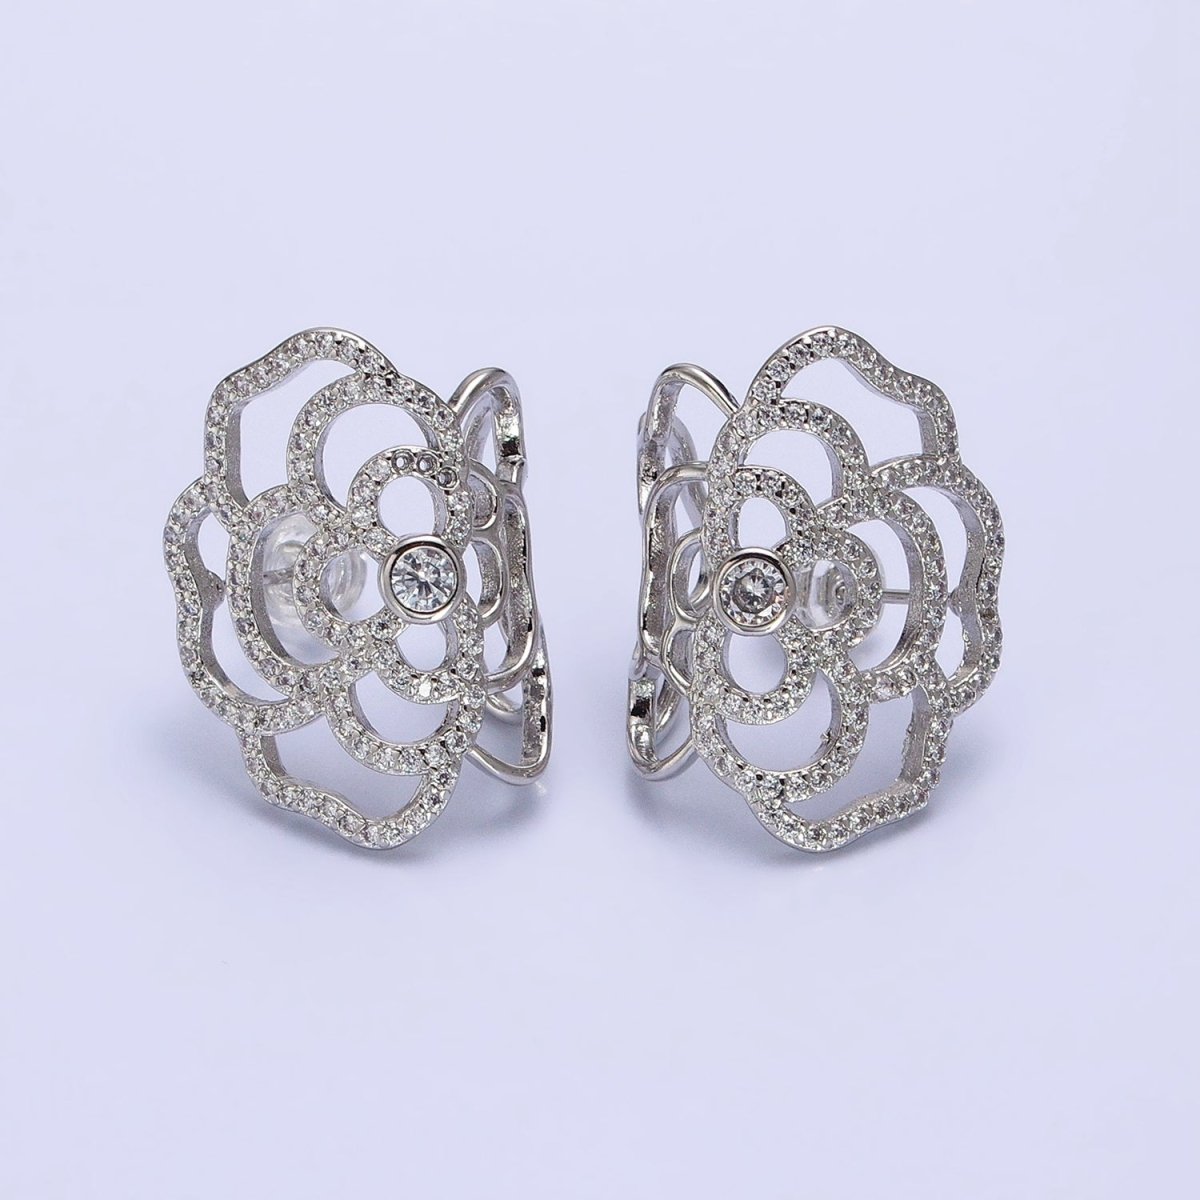 Gold, Silver Curved Rose Flower Nature Micro Paved CZ Stud Earrings | AB594 AB595 - DLUXCA